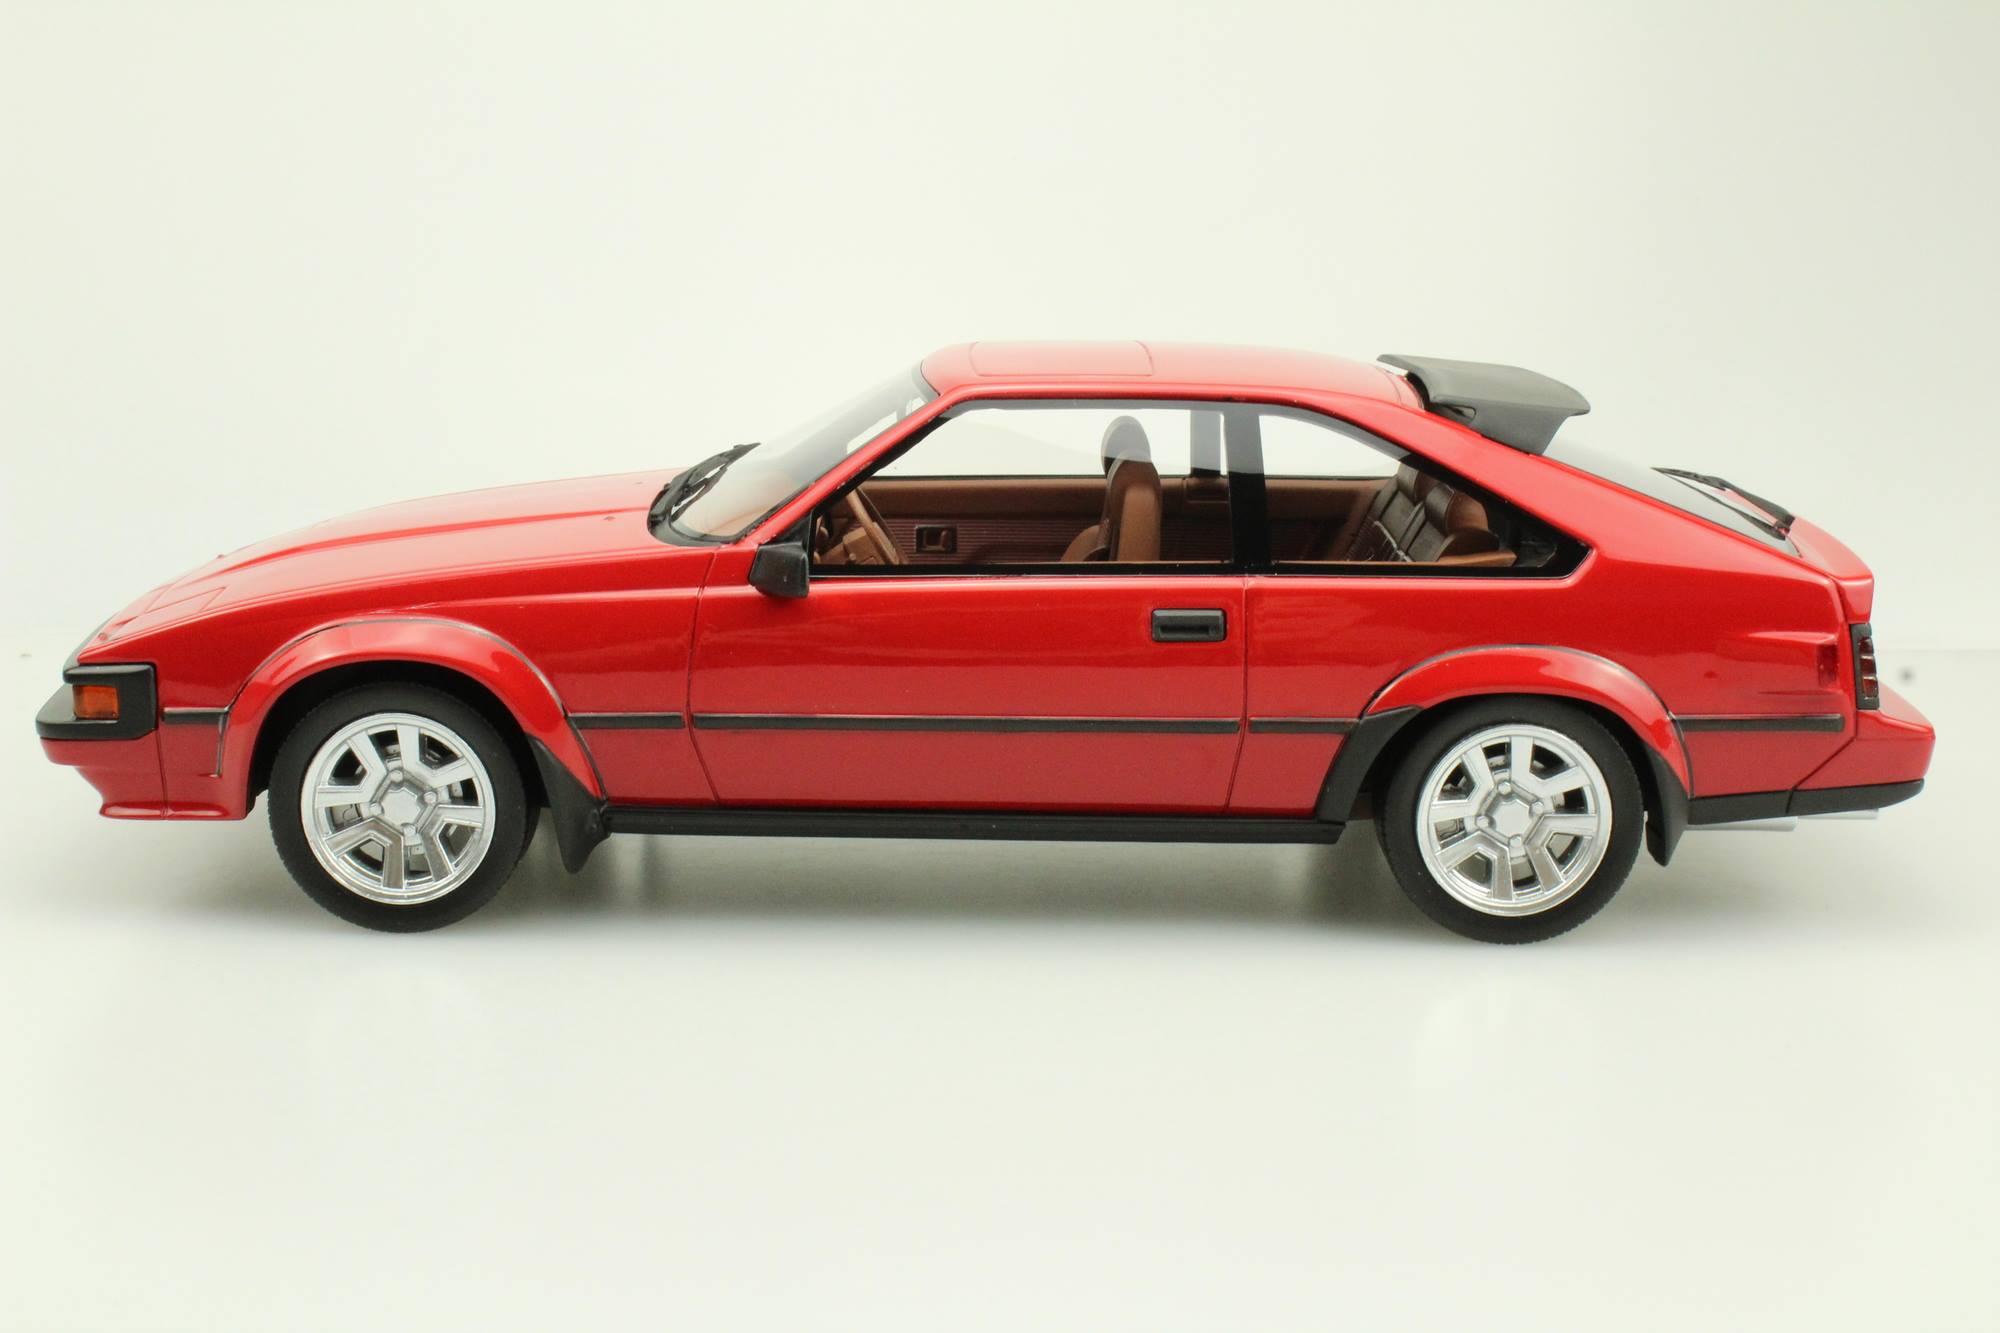 MINICARS: LS Collectibles’ 1:18 Toyota Celica Supra is now available for pre-order